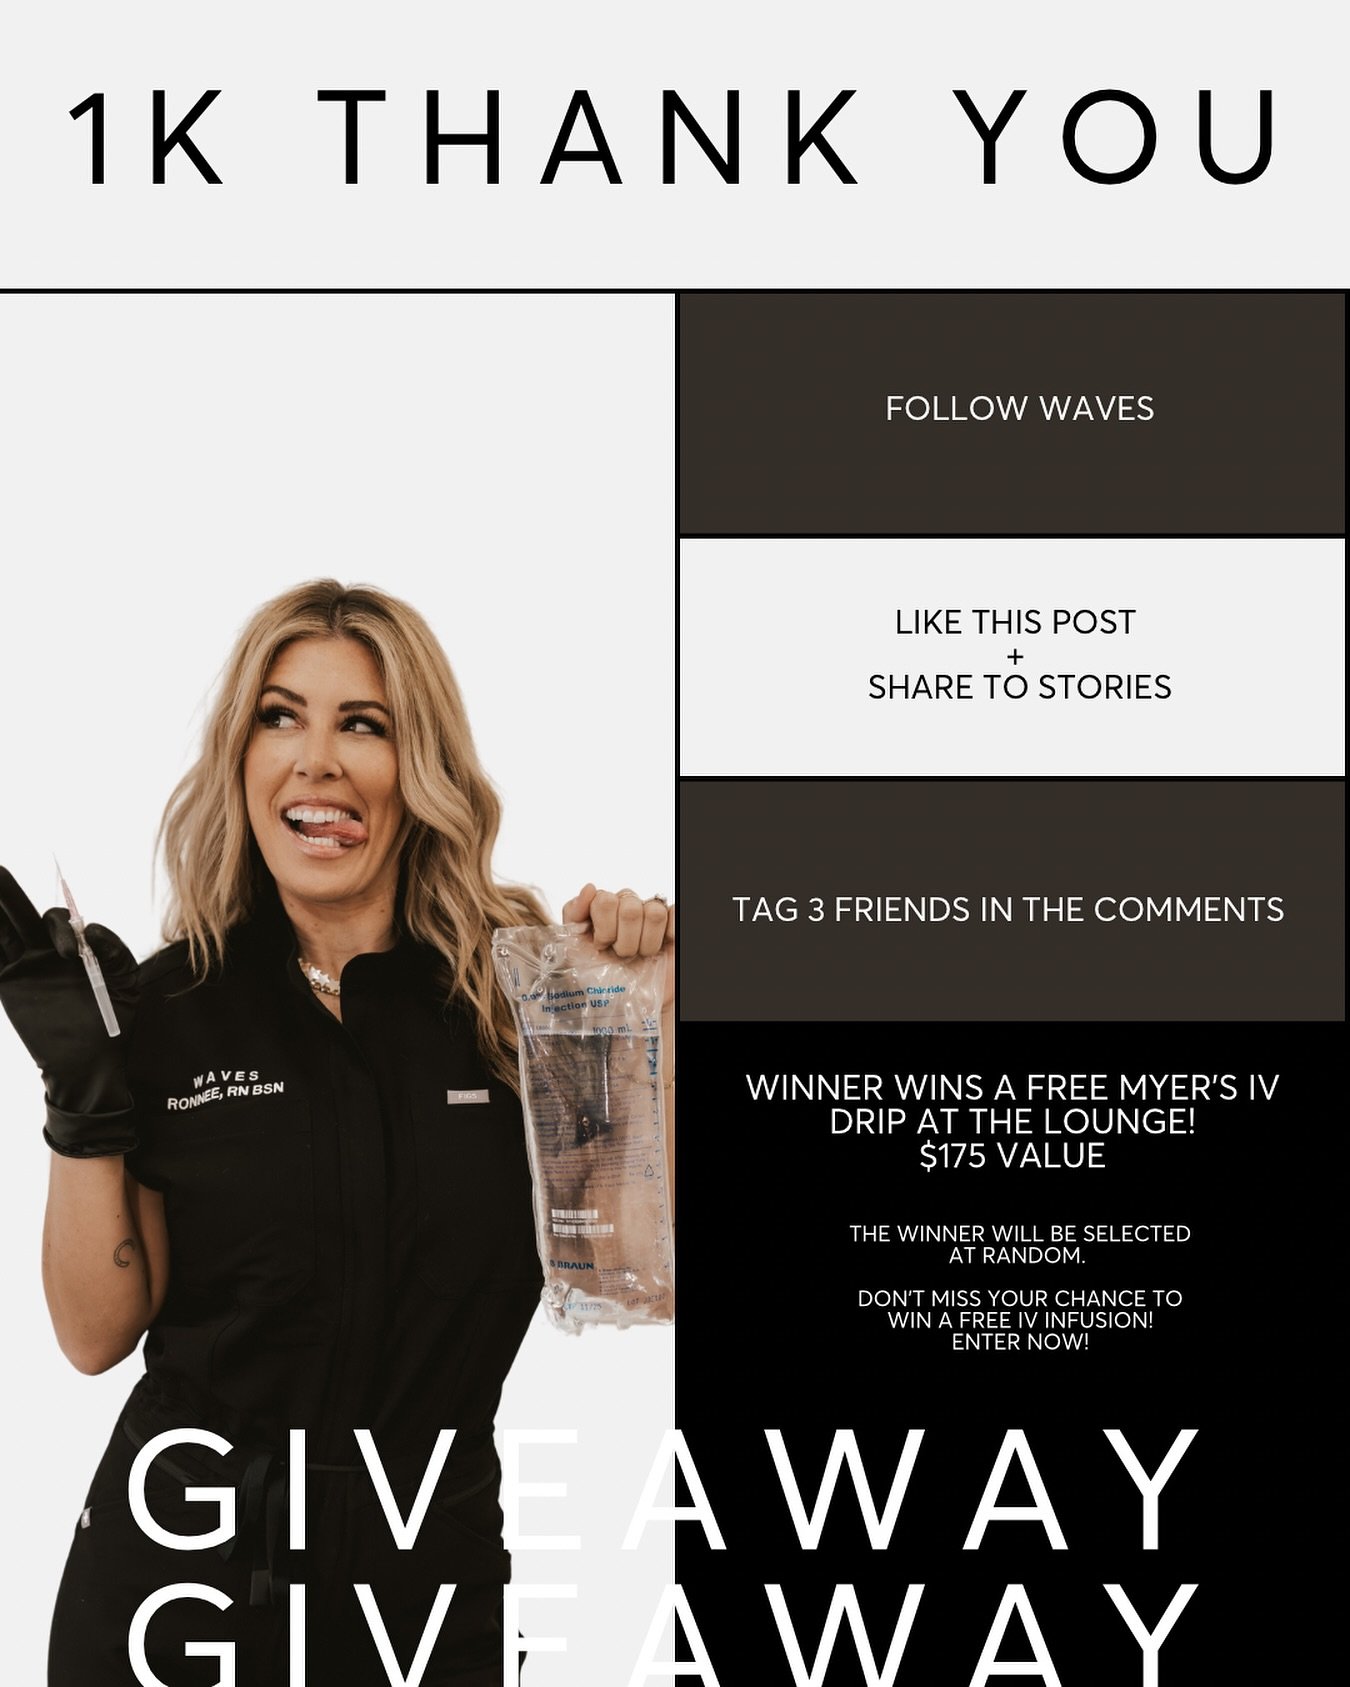 ✨G I V E A W A Y ✨

opened instagram this morning to over a THOUSAND of you!!!

THANK YOU FOR BEING HERE,
THANK YOU FOR SUPPORTING WAVES,
THANK YOU THANK YOU THANK YOU!

as promised, one follower will win a 500 mL myer&rsquo;s drip (valued at $175)!
